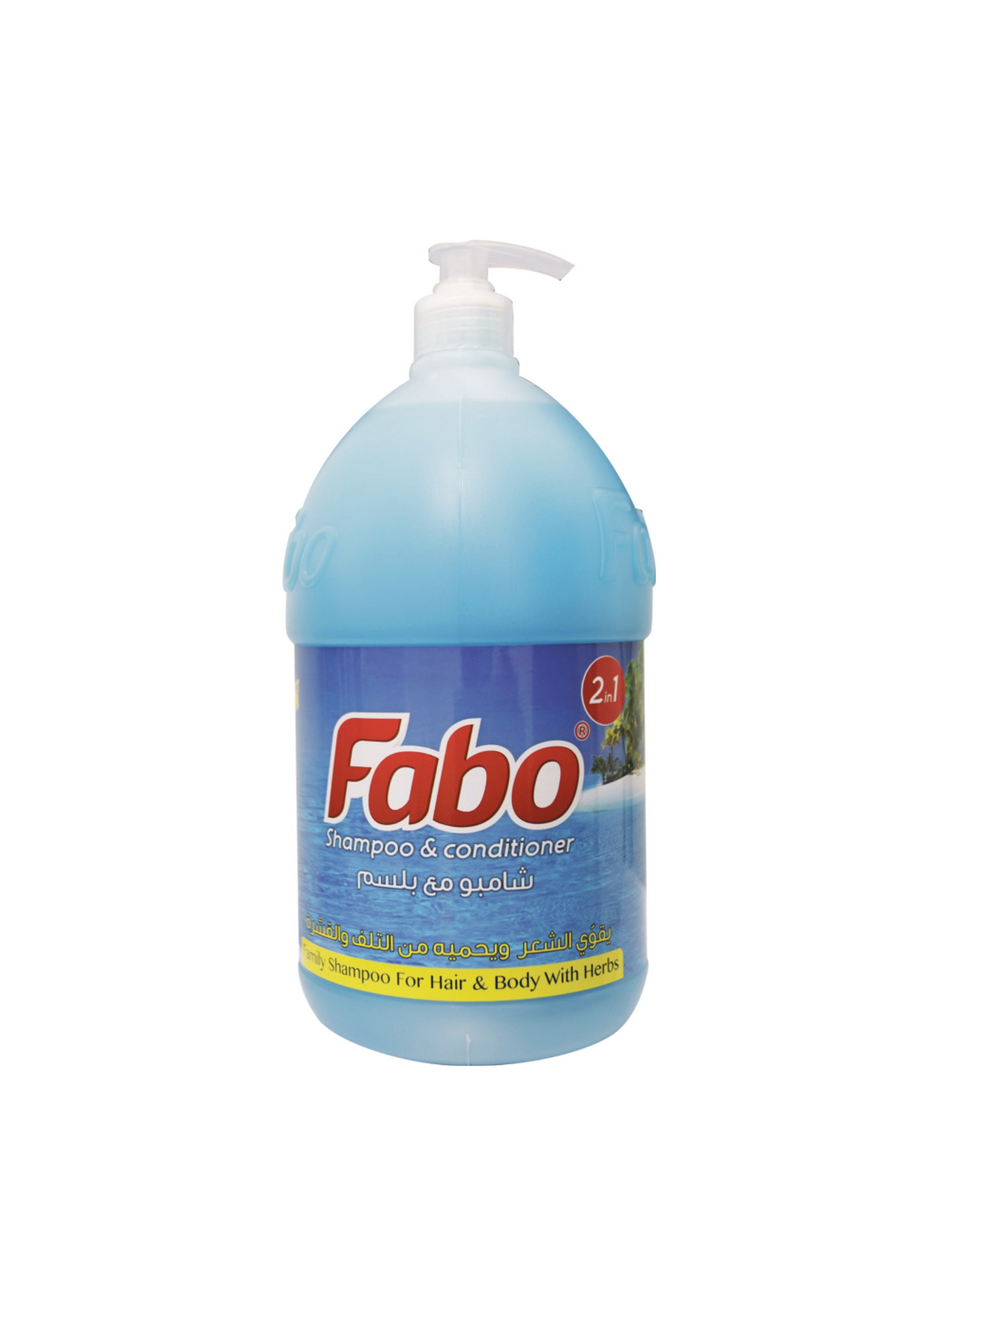 fabo-products_page-0061